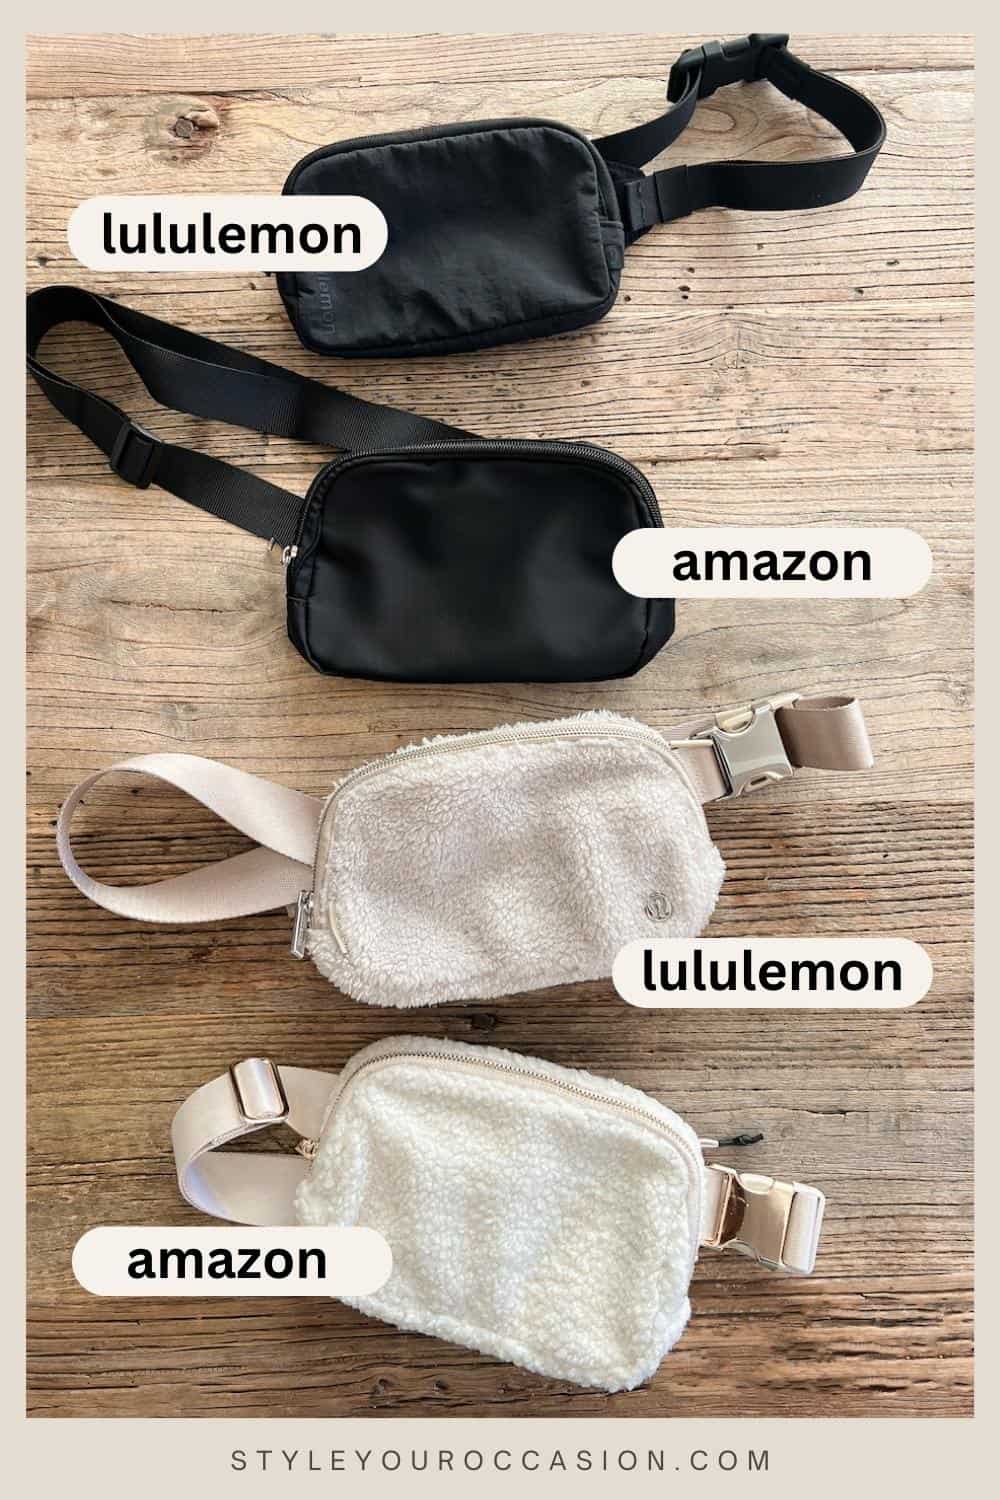 image comparing four belt bags, two black, two beige fleece, two lululemon belt bags and two dupes from amazon